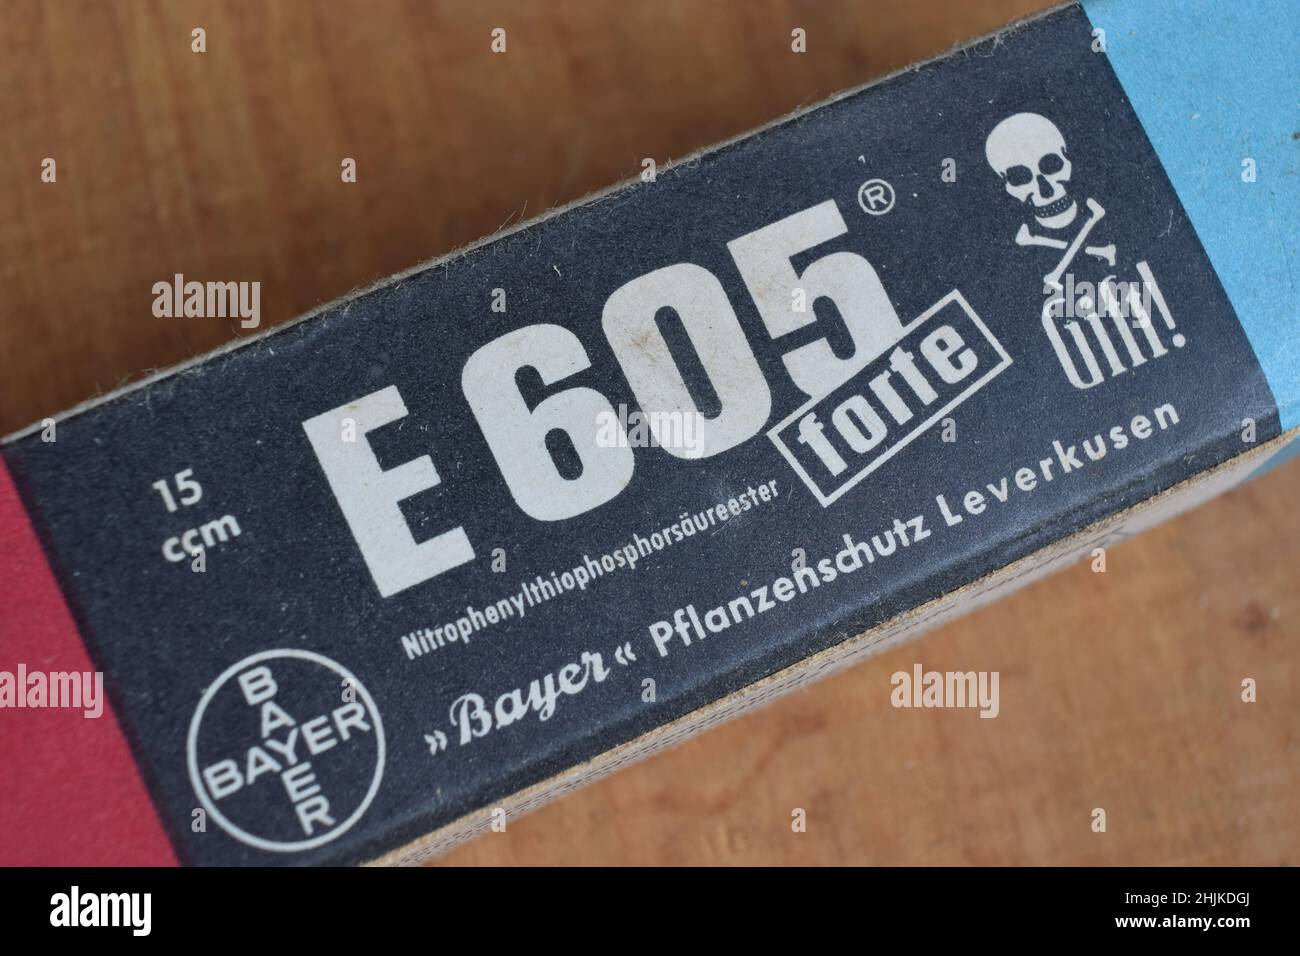 Historical pack of the insecticide Parathion, sold by the Bayer company under the name E 605. Stock Photo